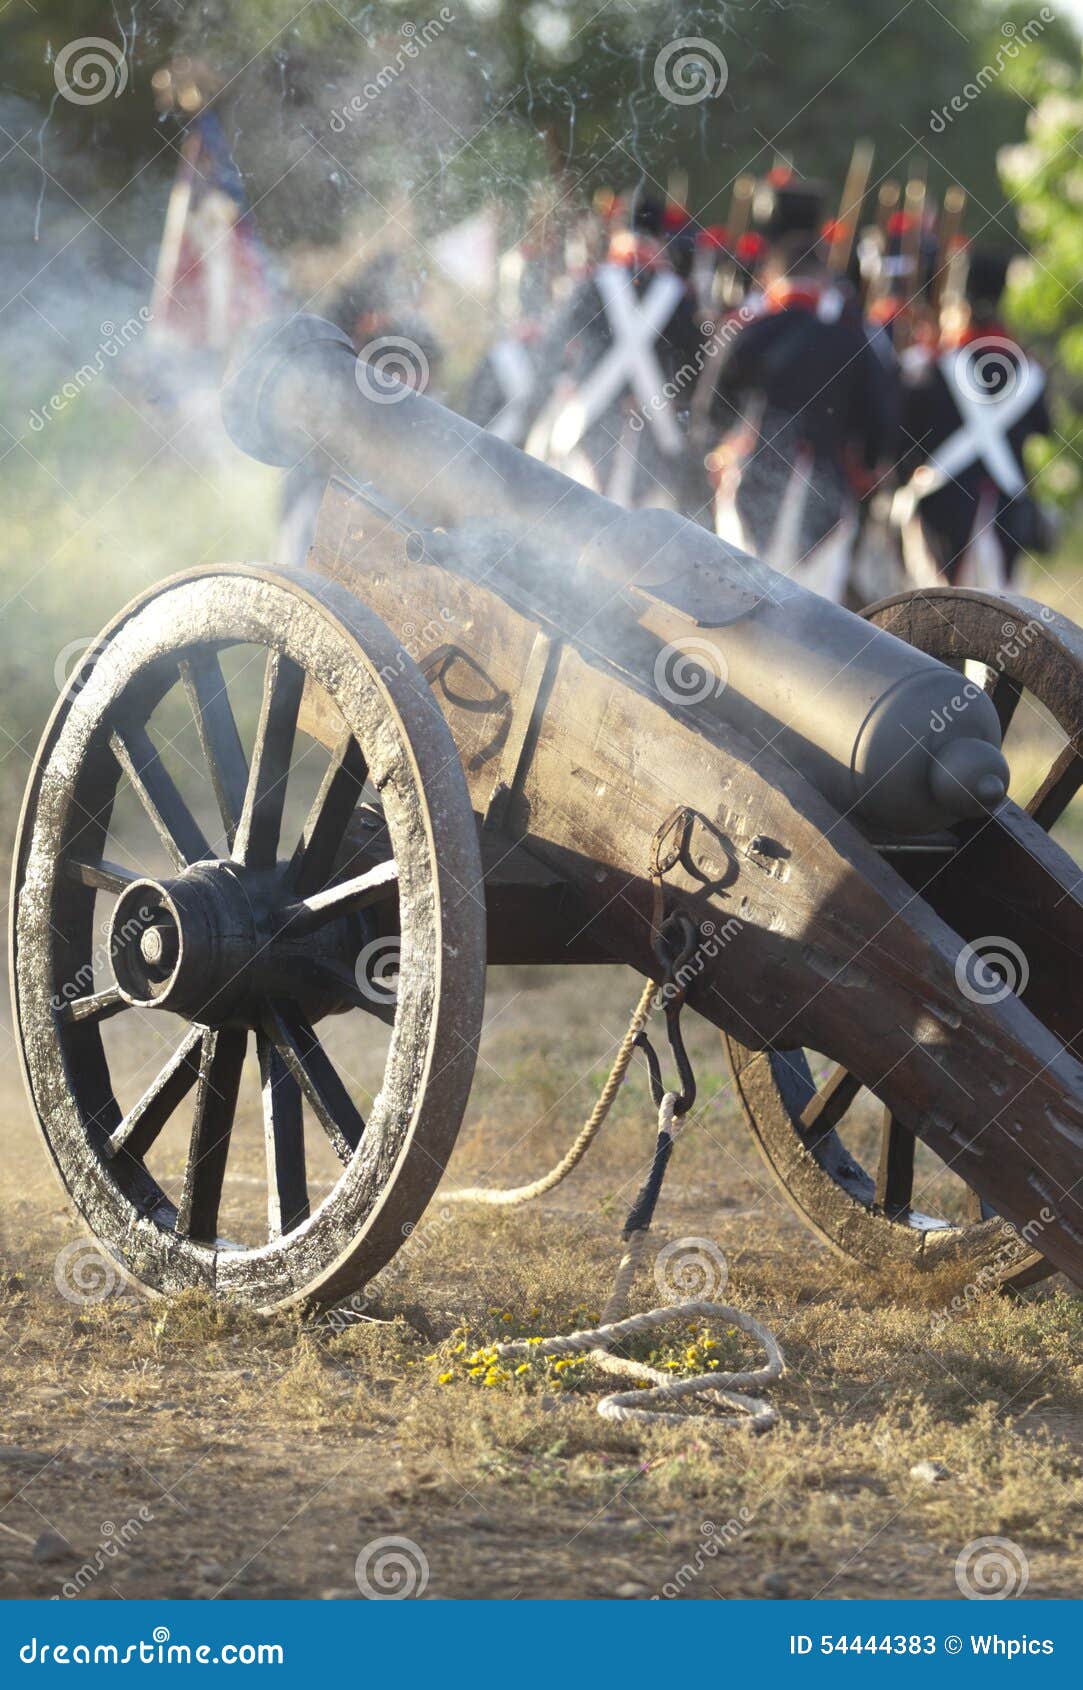 napoleonic artillery in action